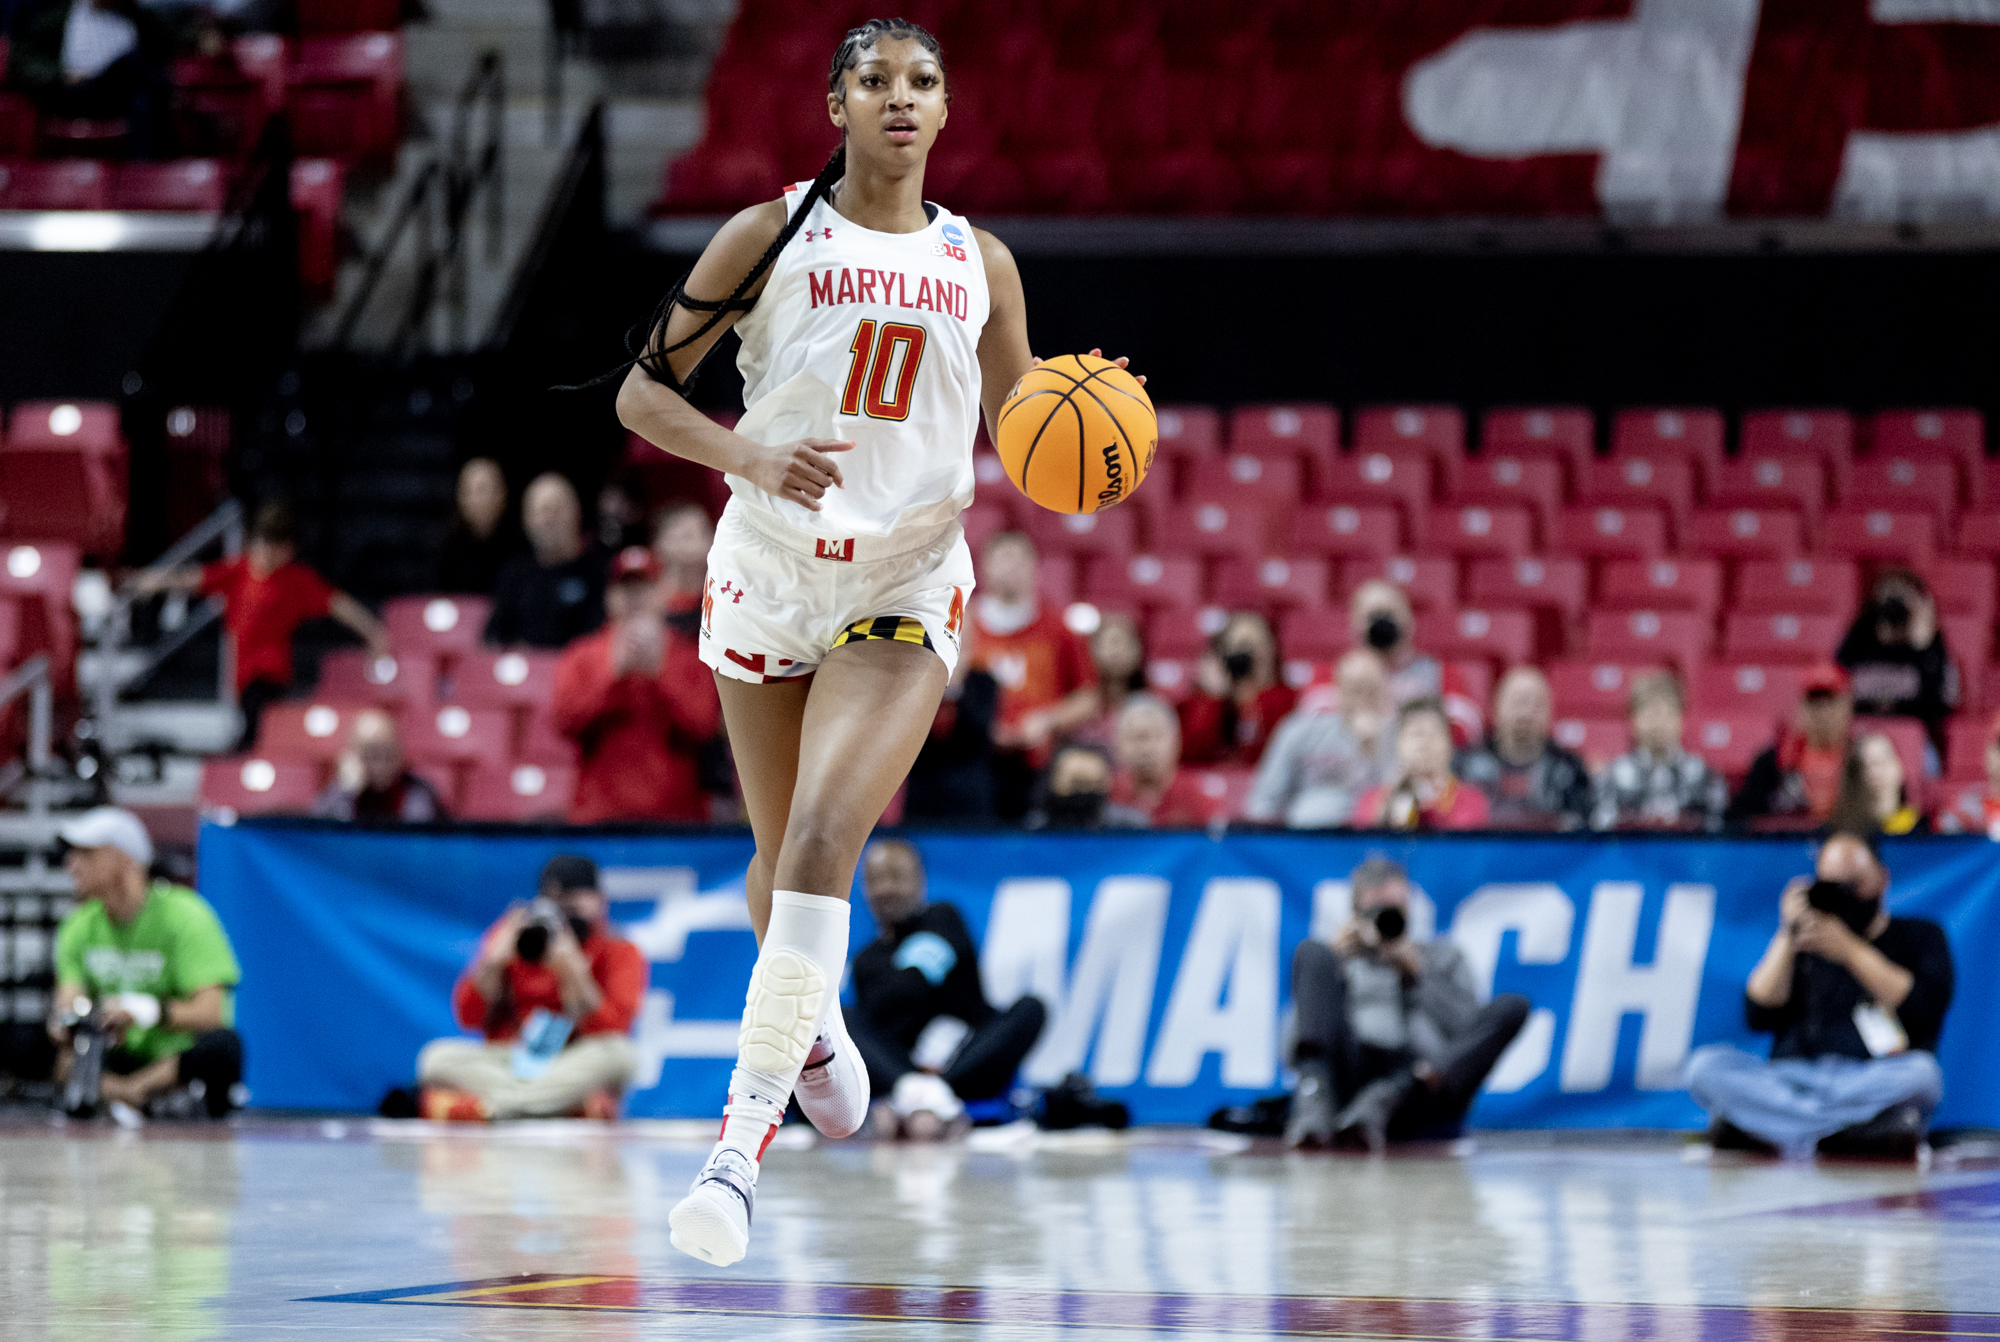 Angel Reese enters transfer portal in major blow to Maryland women’s